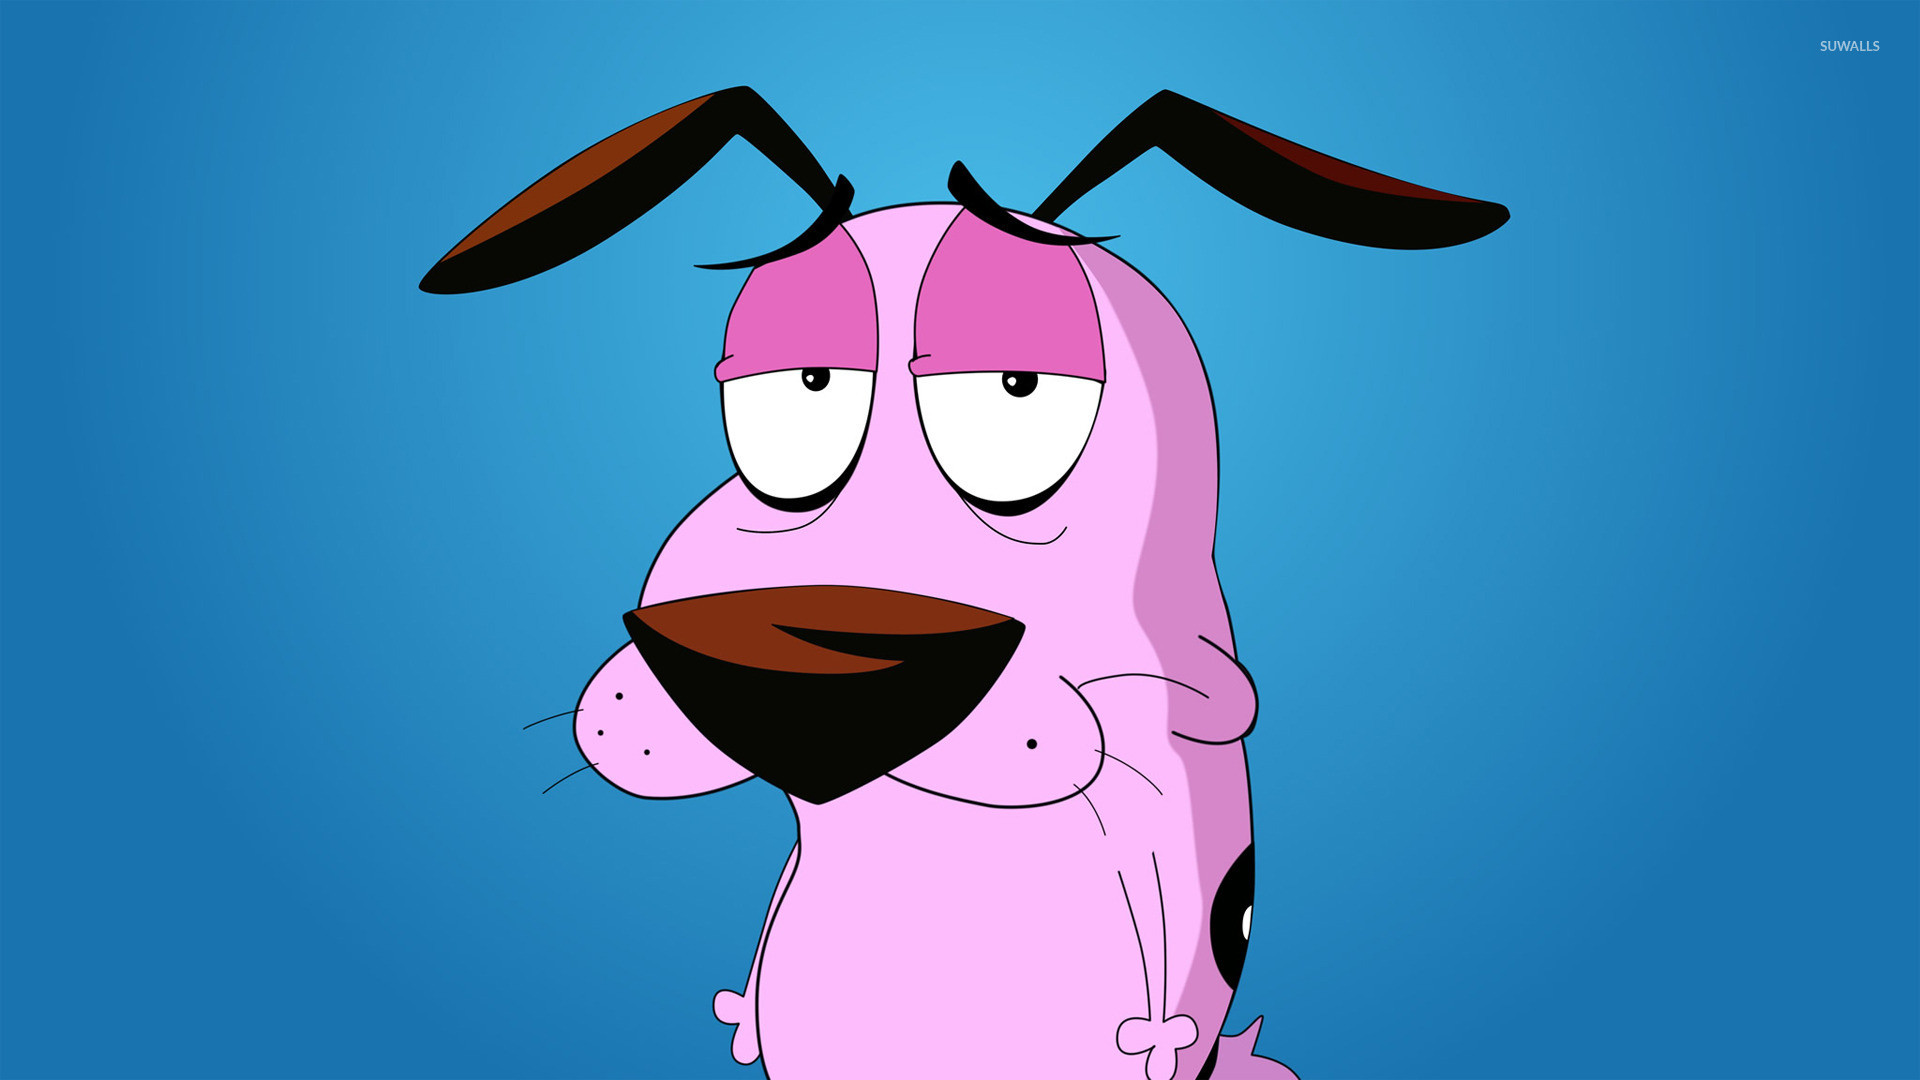 1920x1080 Courage - Courage the Cowardly Dog wallpaper